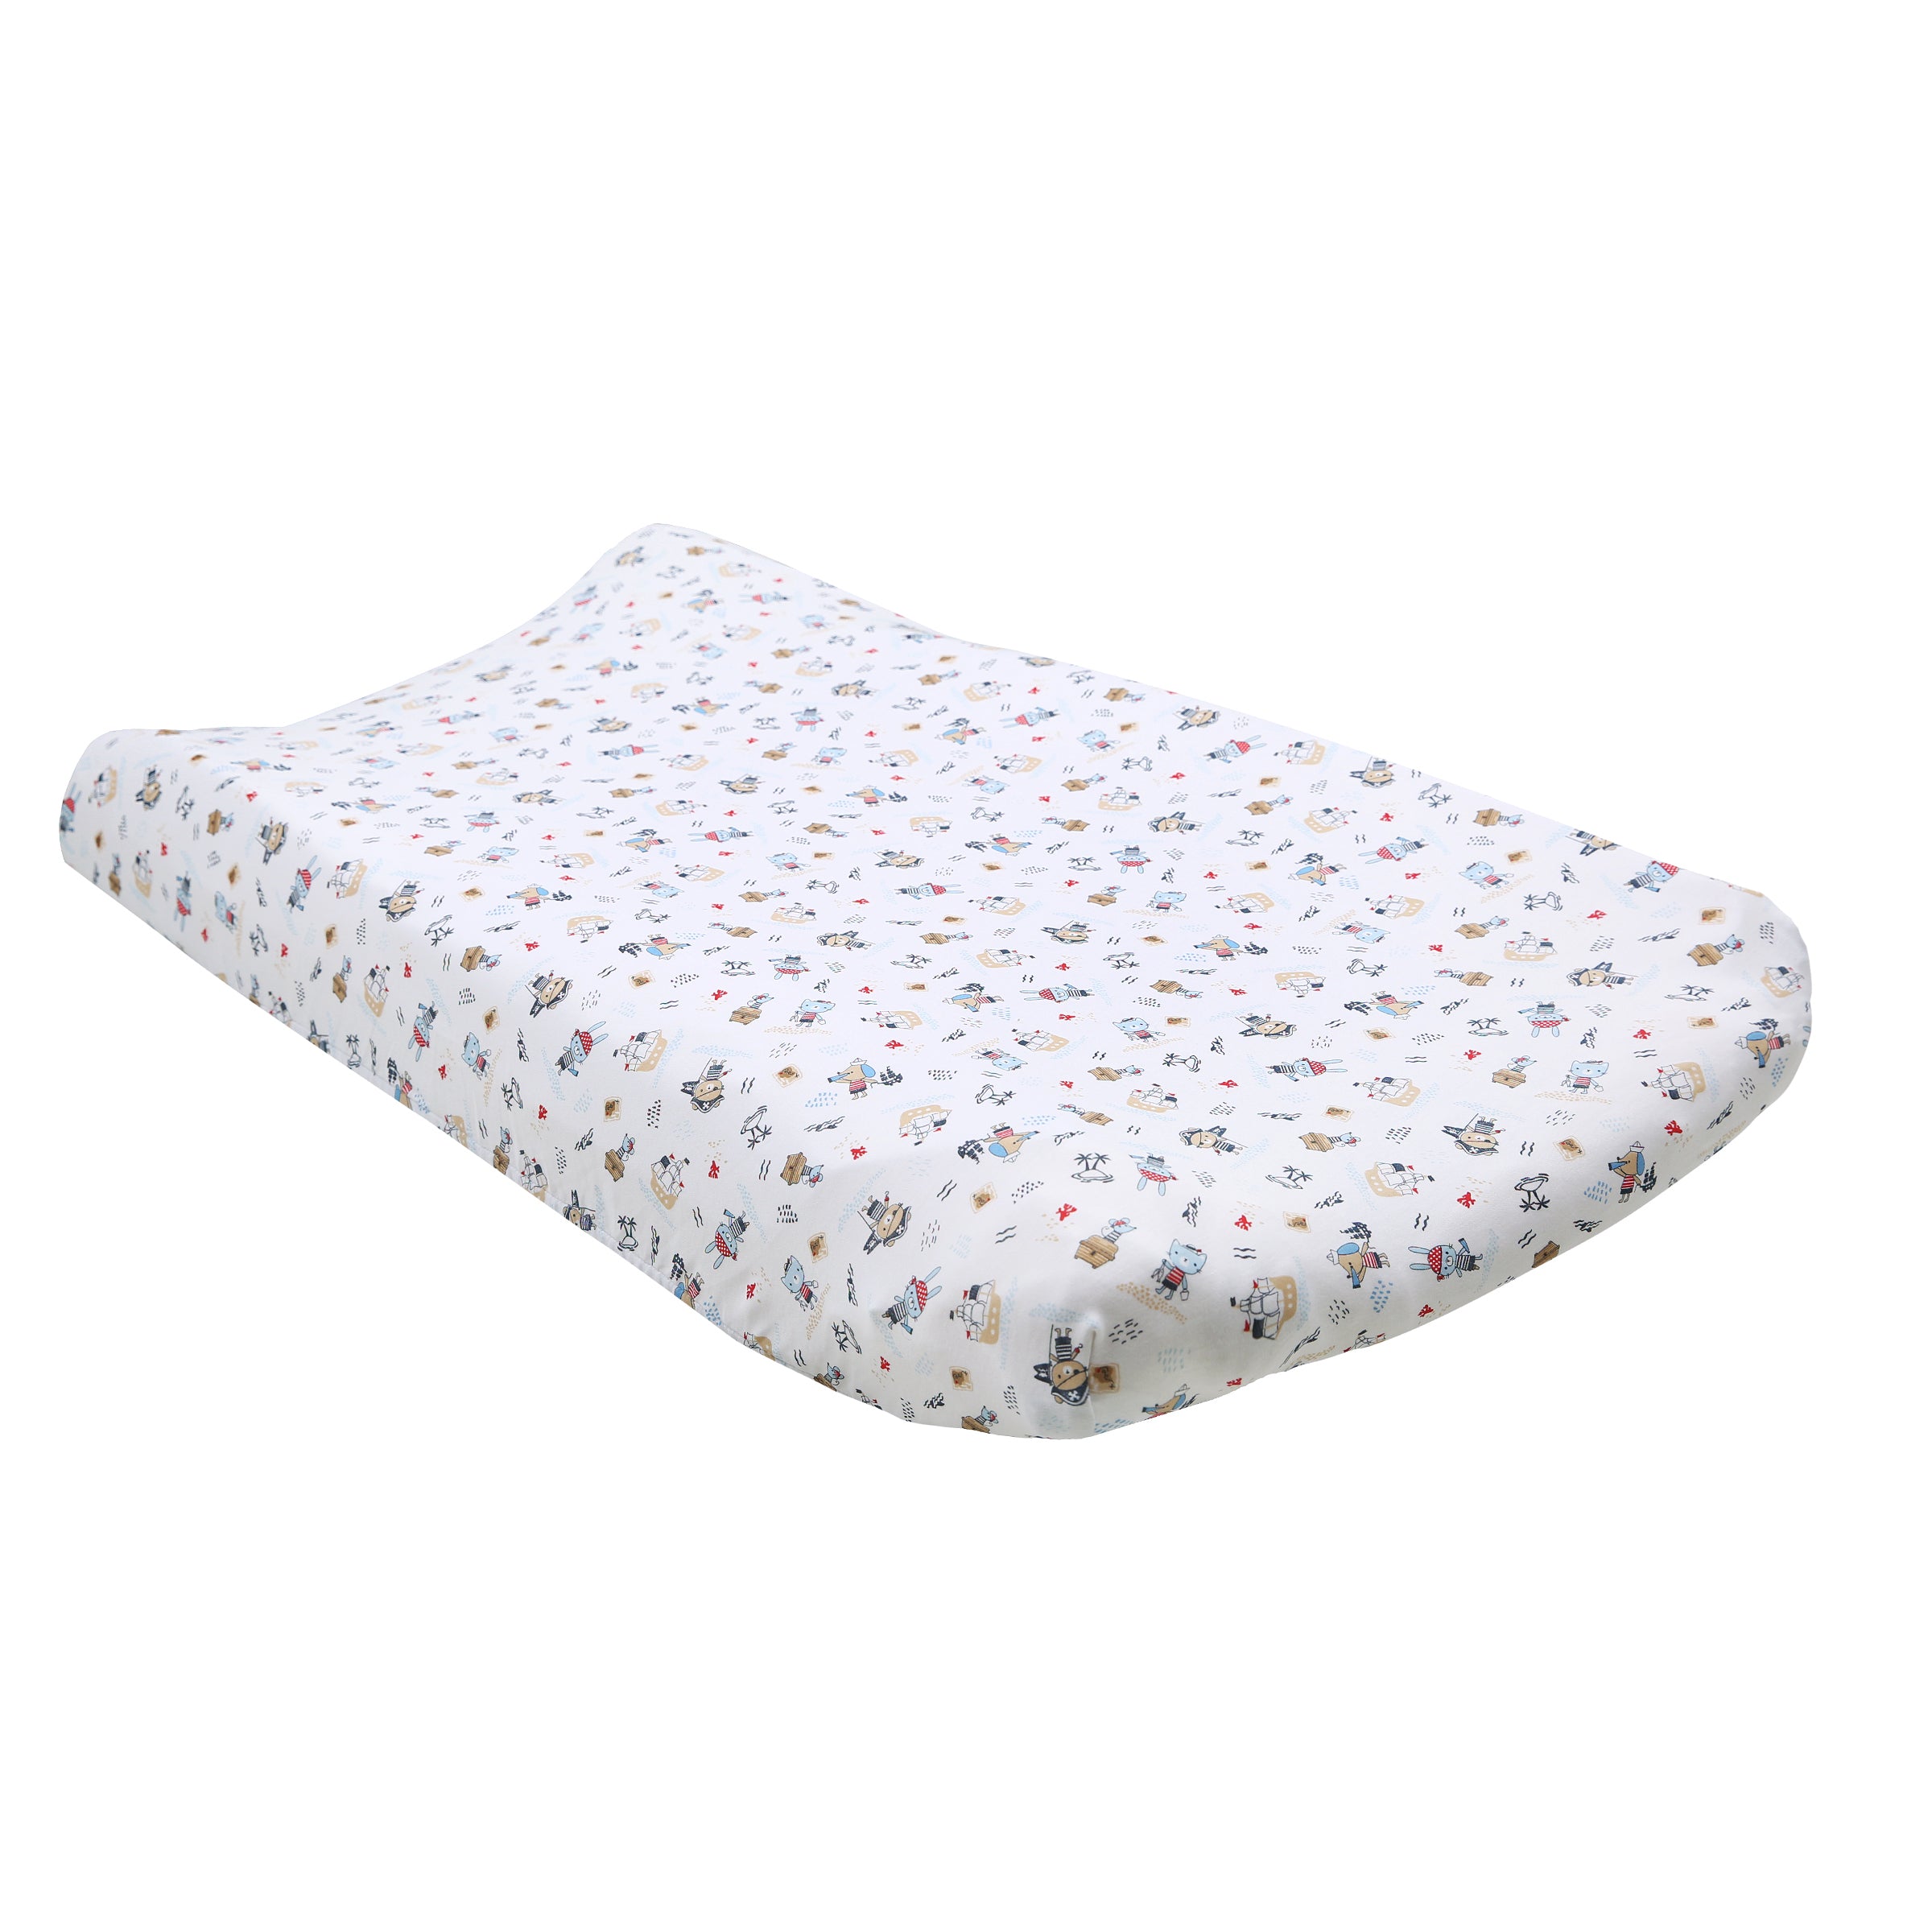 Ahoy Matey! Print Changing Pad Cover